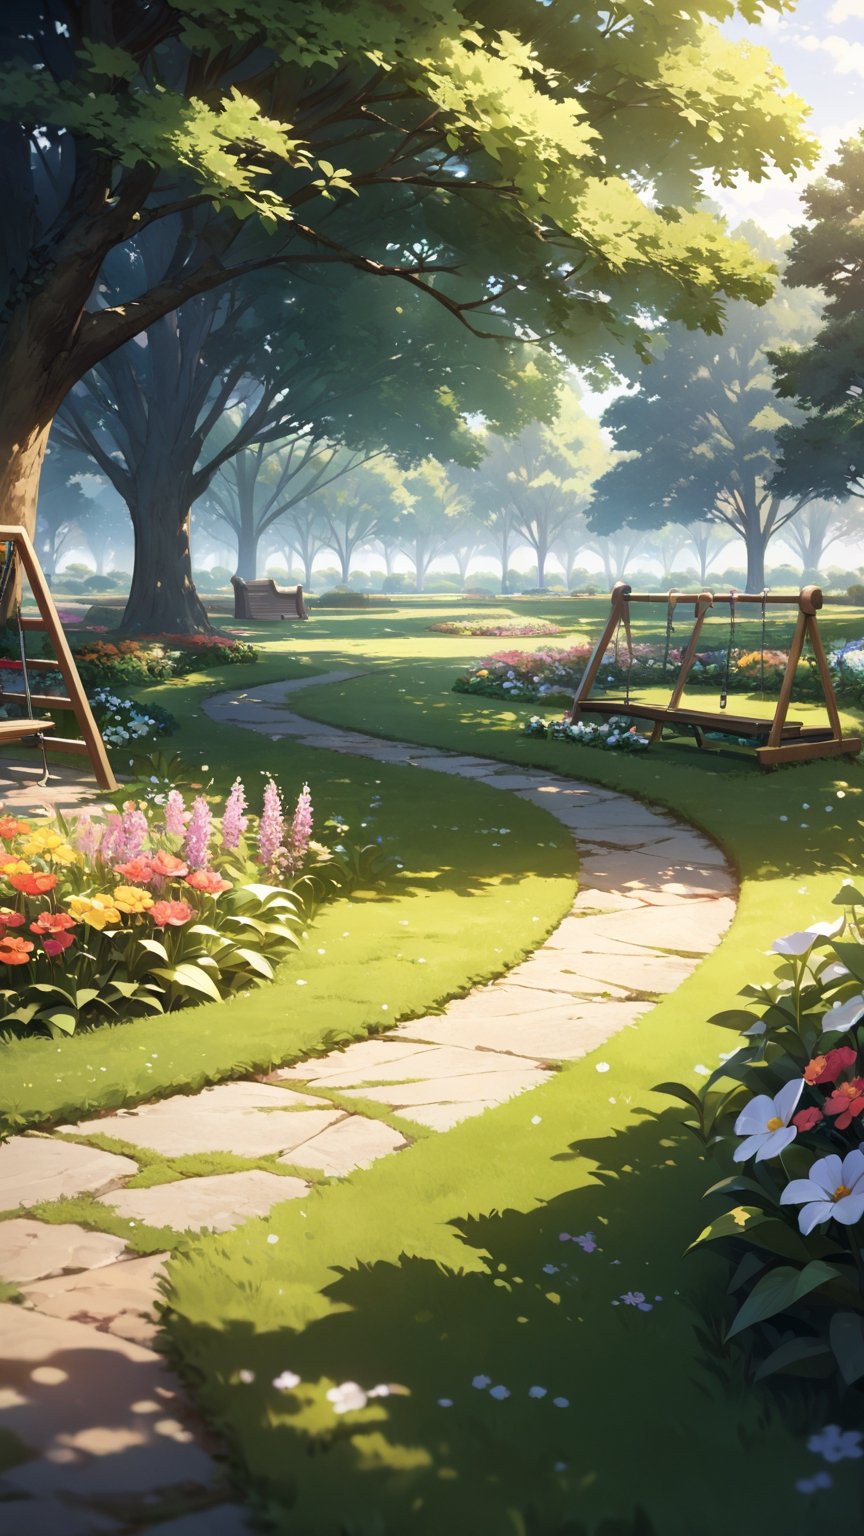 (masterpiece),((ultra-detailed)), (highly detailed CG illustration),(expressionless), (best quality:1.2), High quality texture, intricate details, detailed texture, High quality shadow, Cinematic Light, Depth of field, light source contrast, perspective, no humans

sky,
Central lawn of the park,
Gardens and flower beds,
Trees and shrubbery within the park,
Recreational facilities such as swings, slides, etc.,

Flowers and plants within the park,